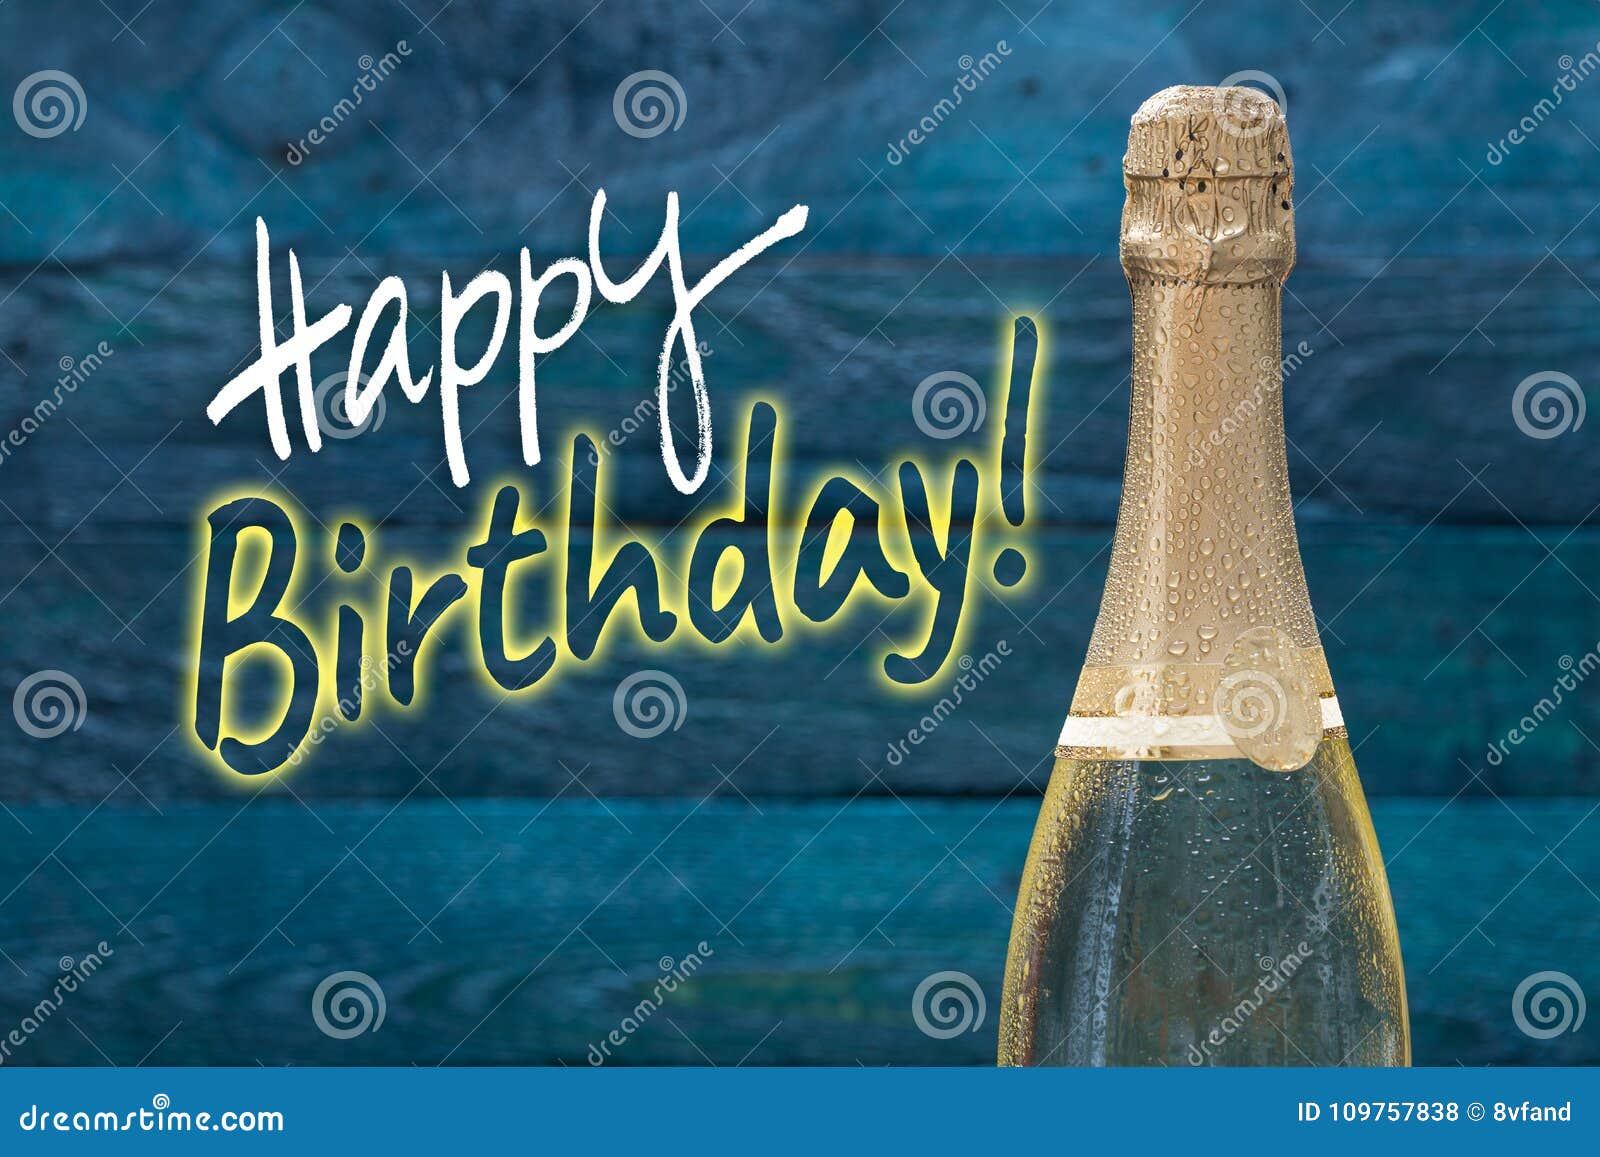 18 5 Happy Birthday Champagne Photos Free Royalty Free Stock Photos From Dreamstime